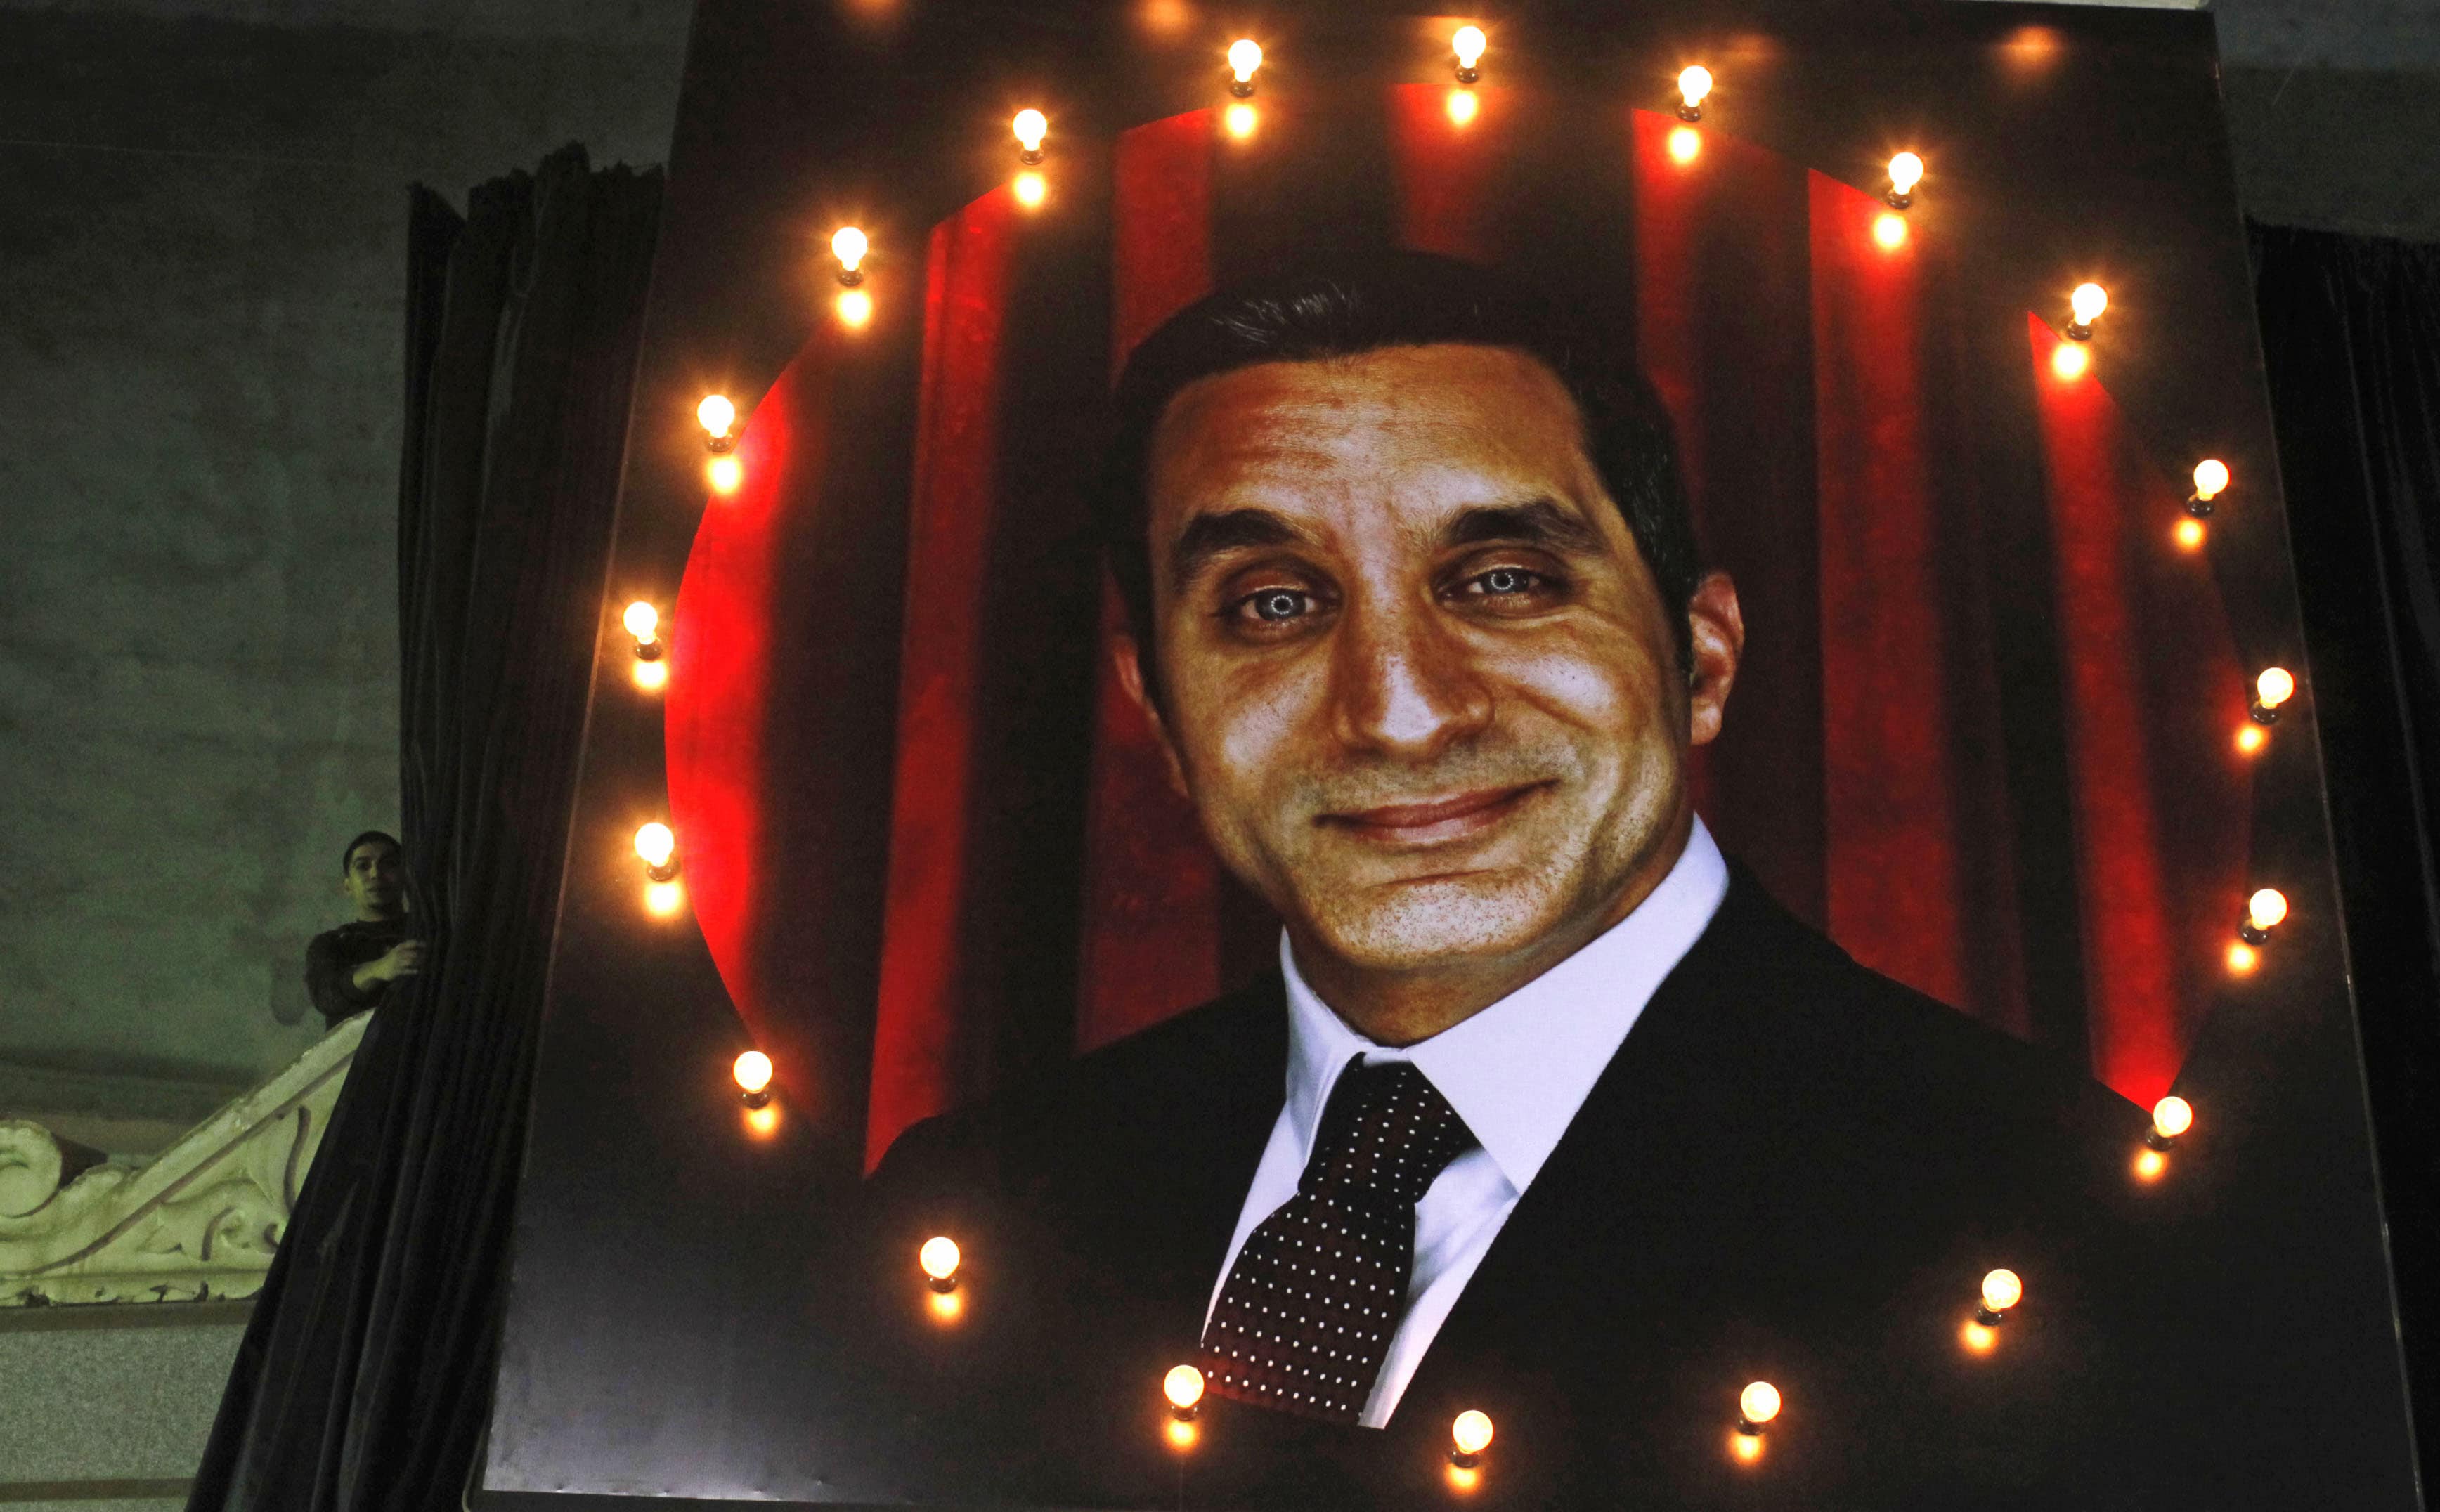 A worker lifts curtains in a theater to reveal a picture of Egyptian satirist Bassem Youssef for his comic show "Al-Bernameg" (The Programme), in Giza 15 January 2013, REUTERS/Asmaa Waguih